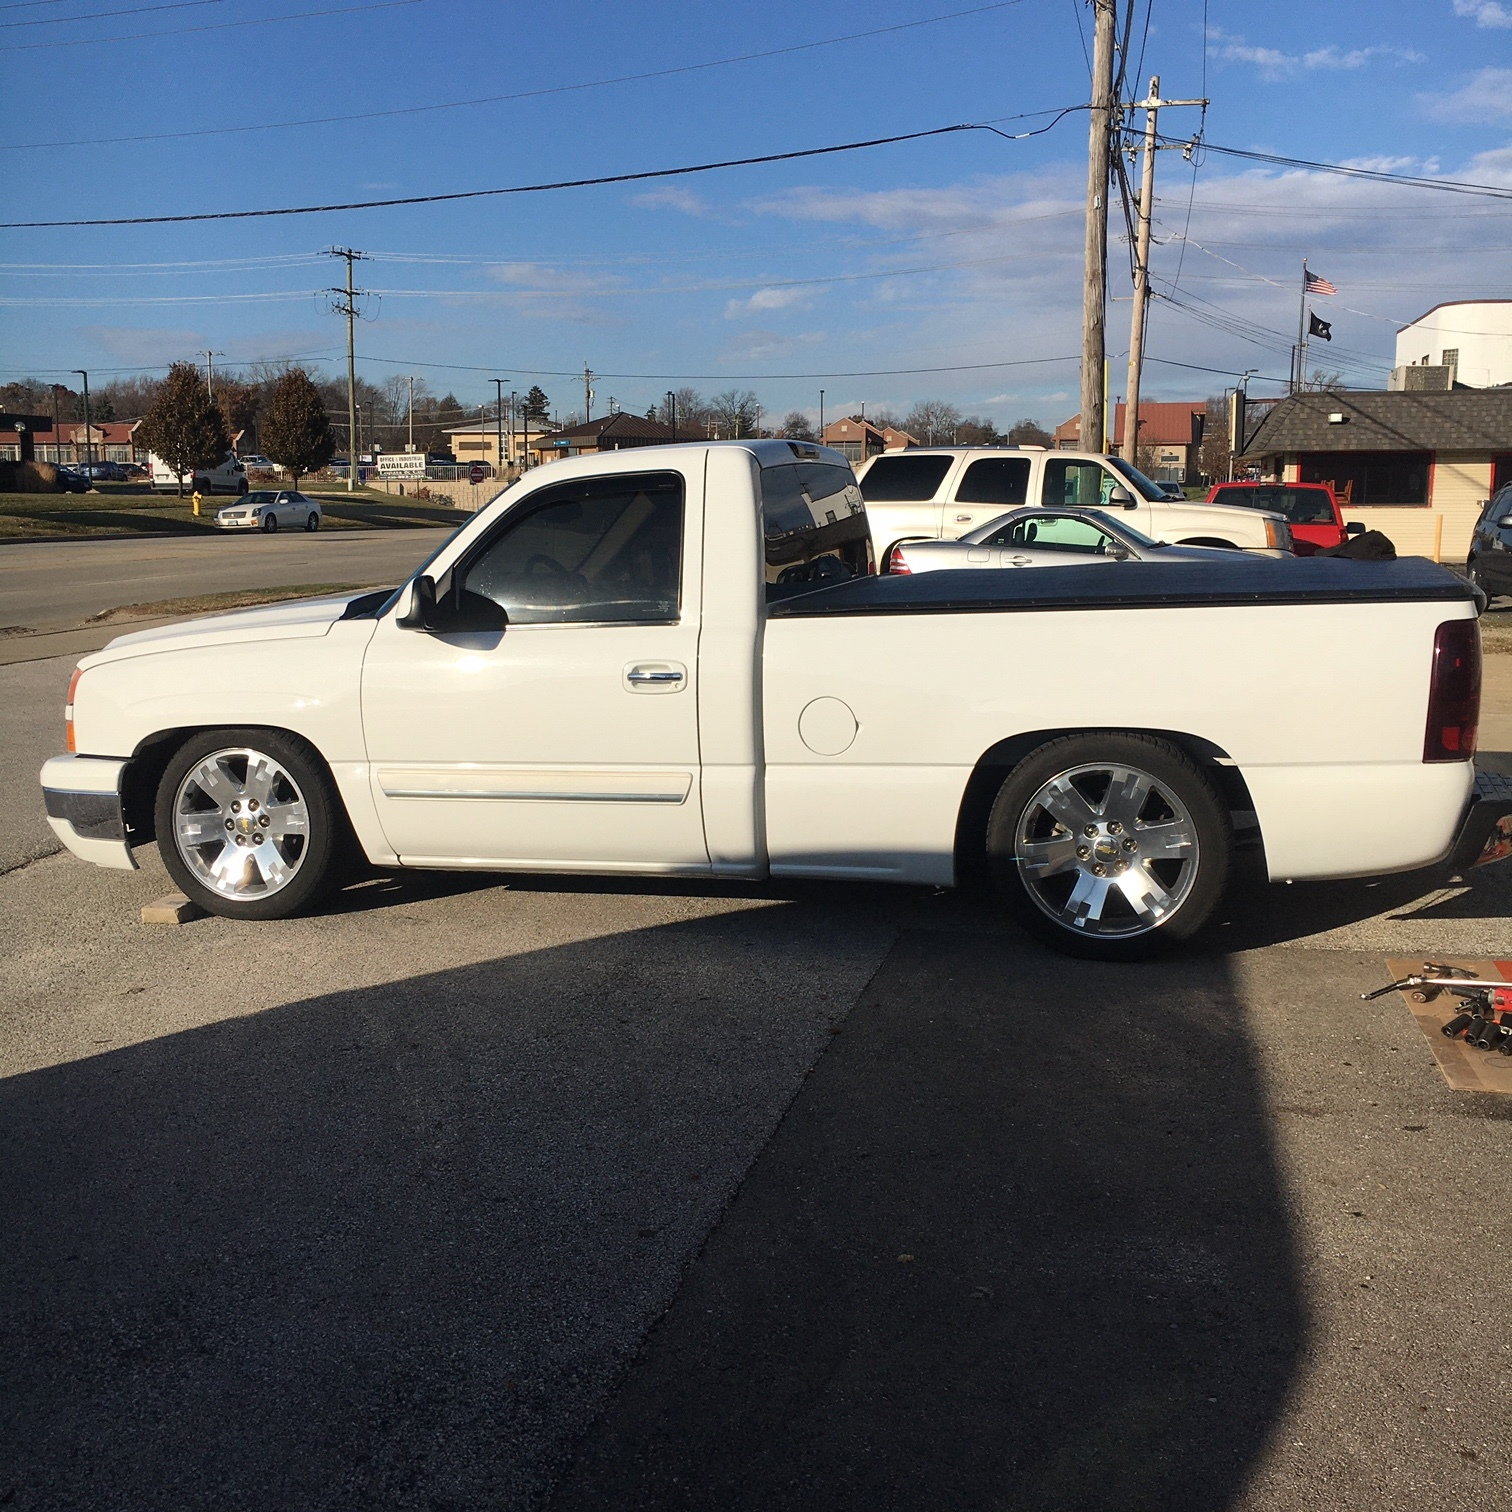 nbs 5/8 with 24s